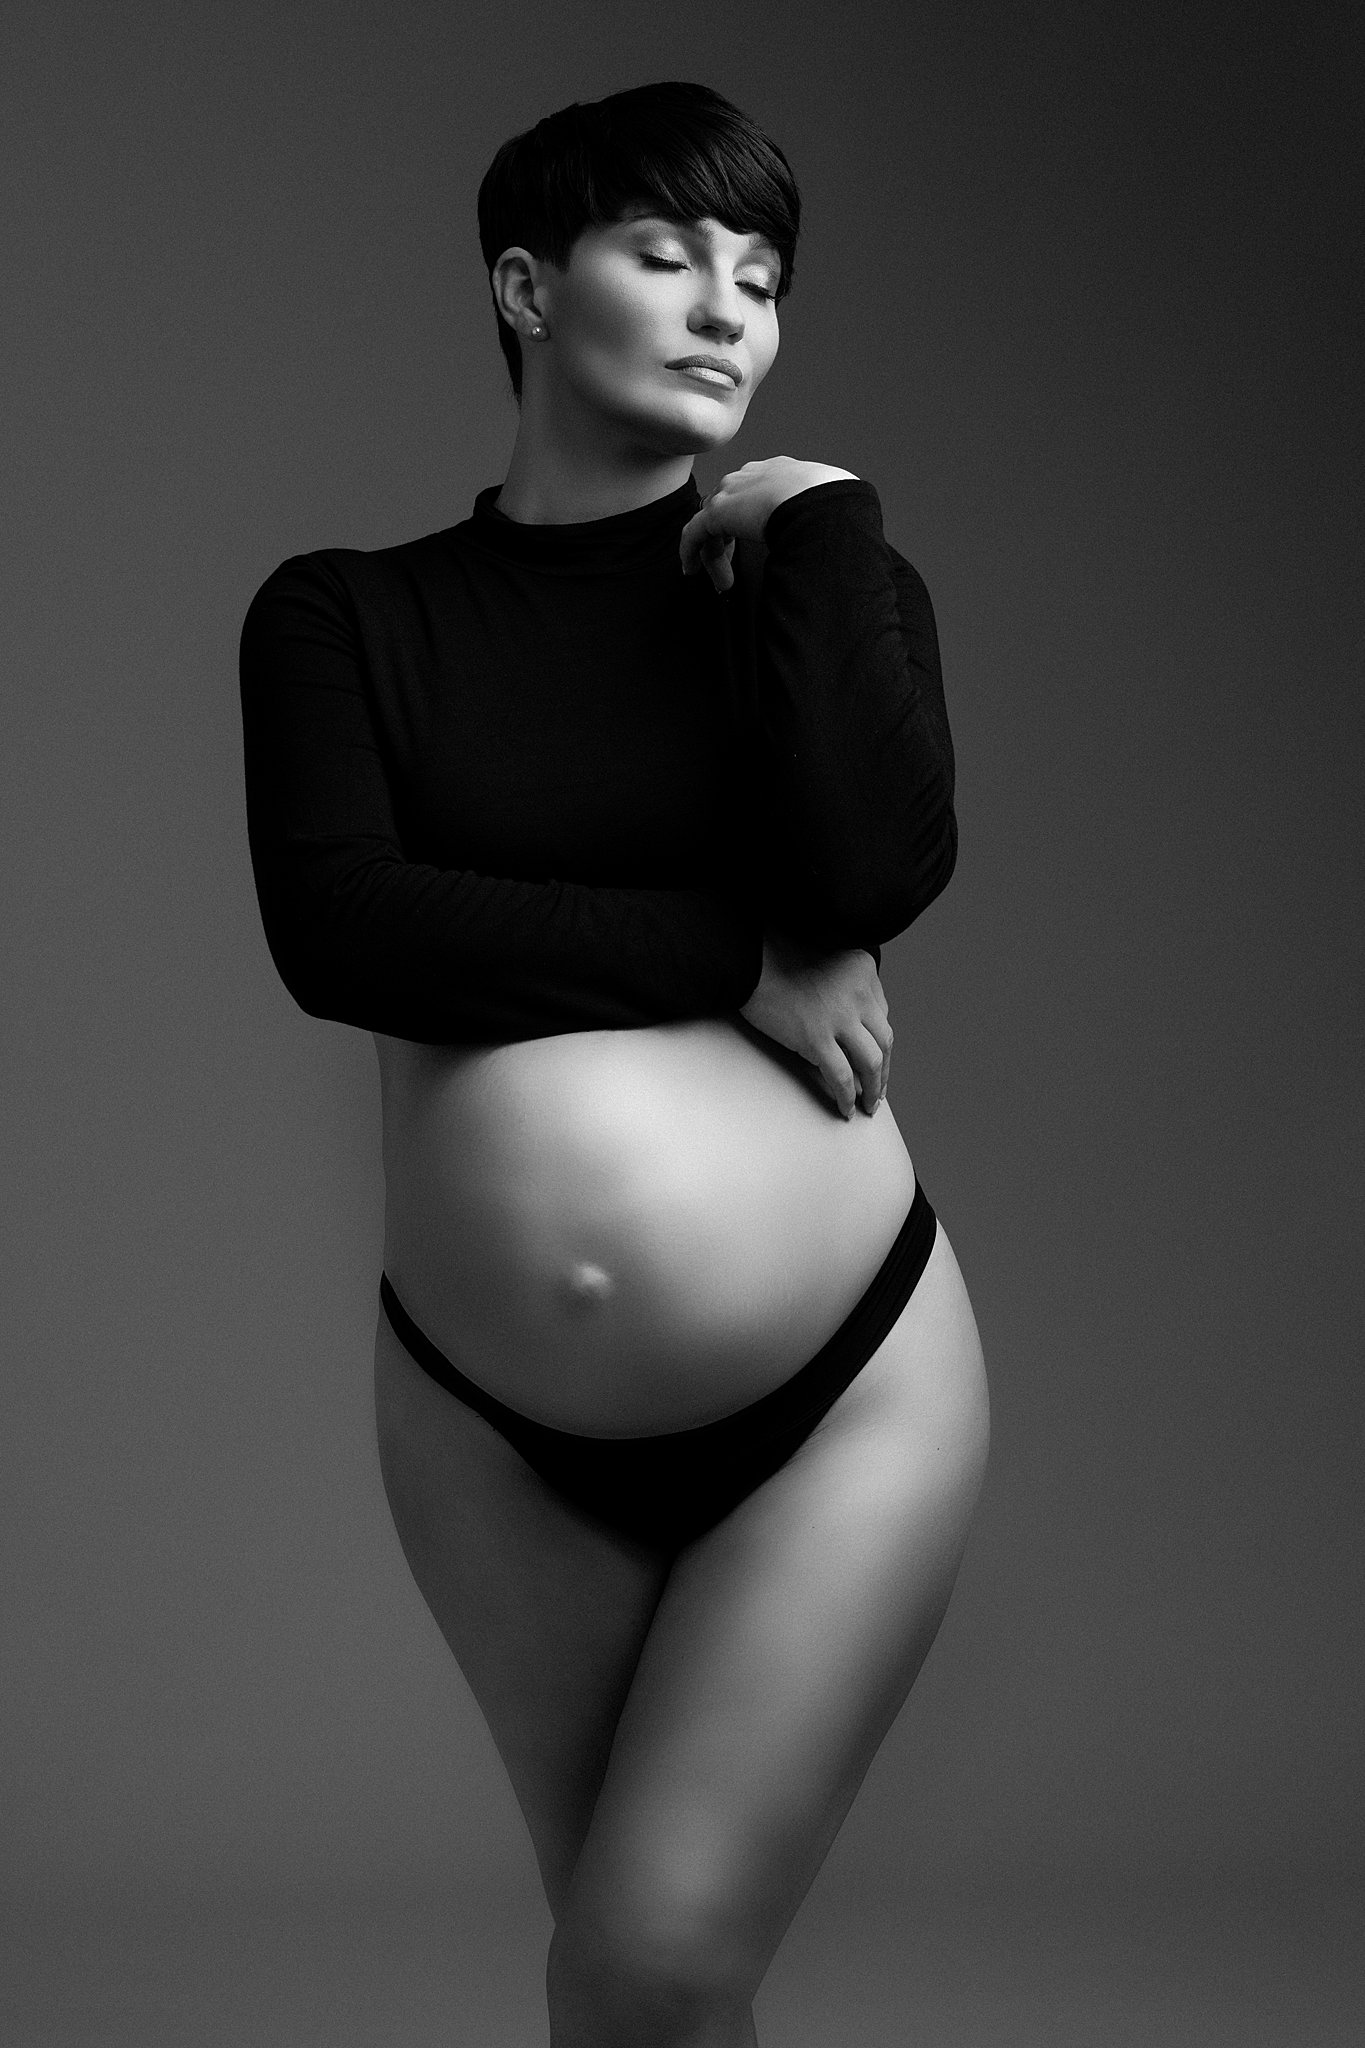 Mom to be stands in a studio in a black long sleeve top that exposes her entire belly moonlight midwifery